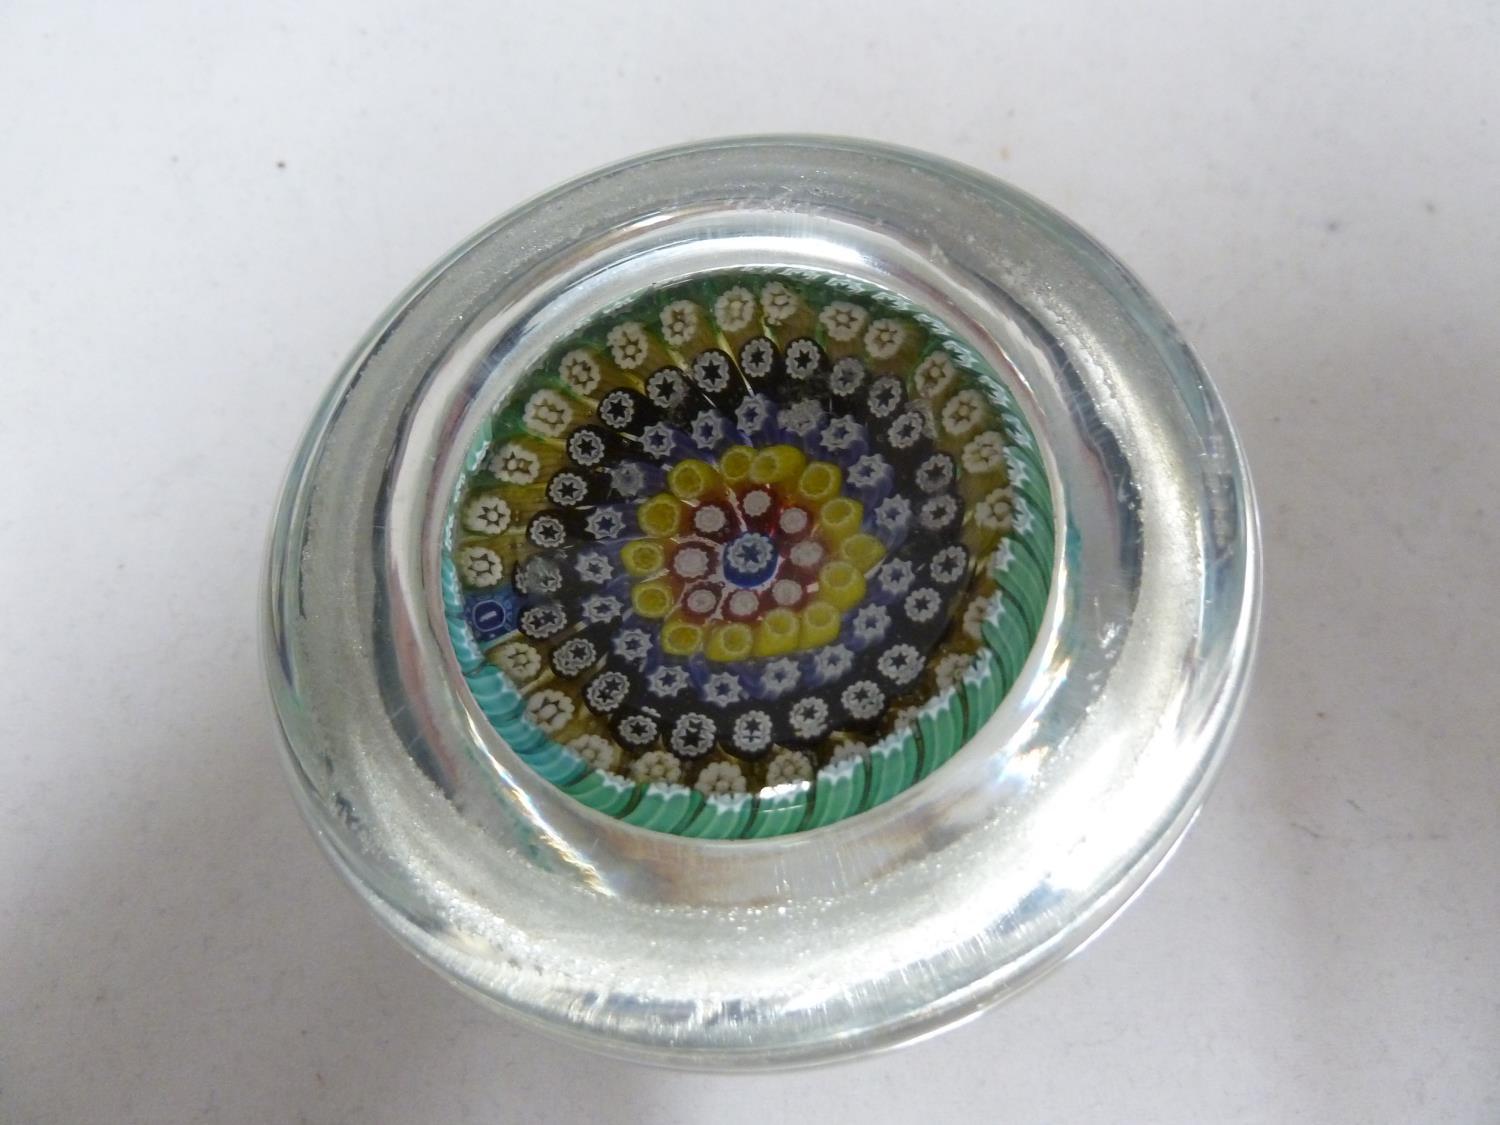 Whitefriars - a glass paperweight, concentric millifiori, canes, date cane for 1977 - Image 4 of 4